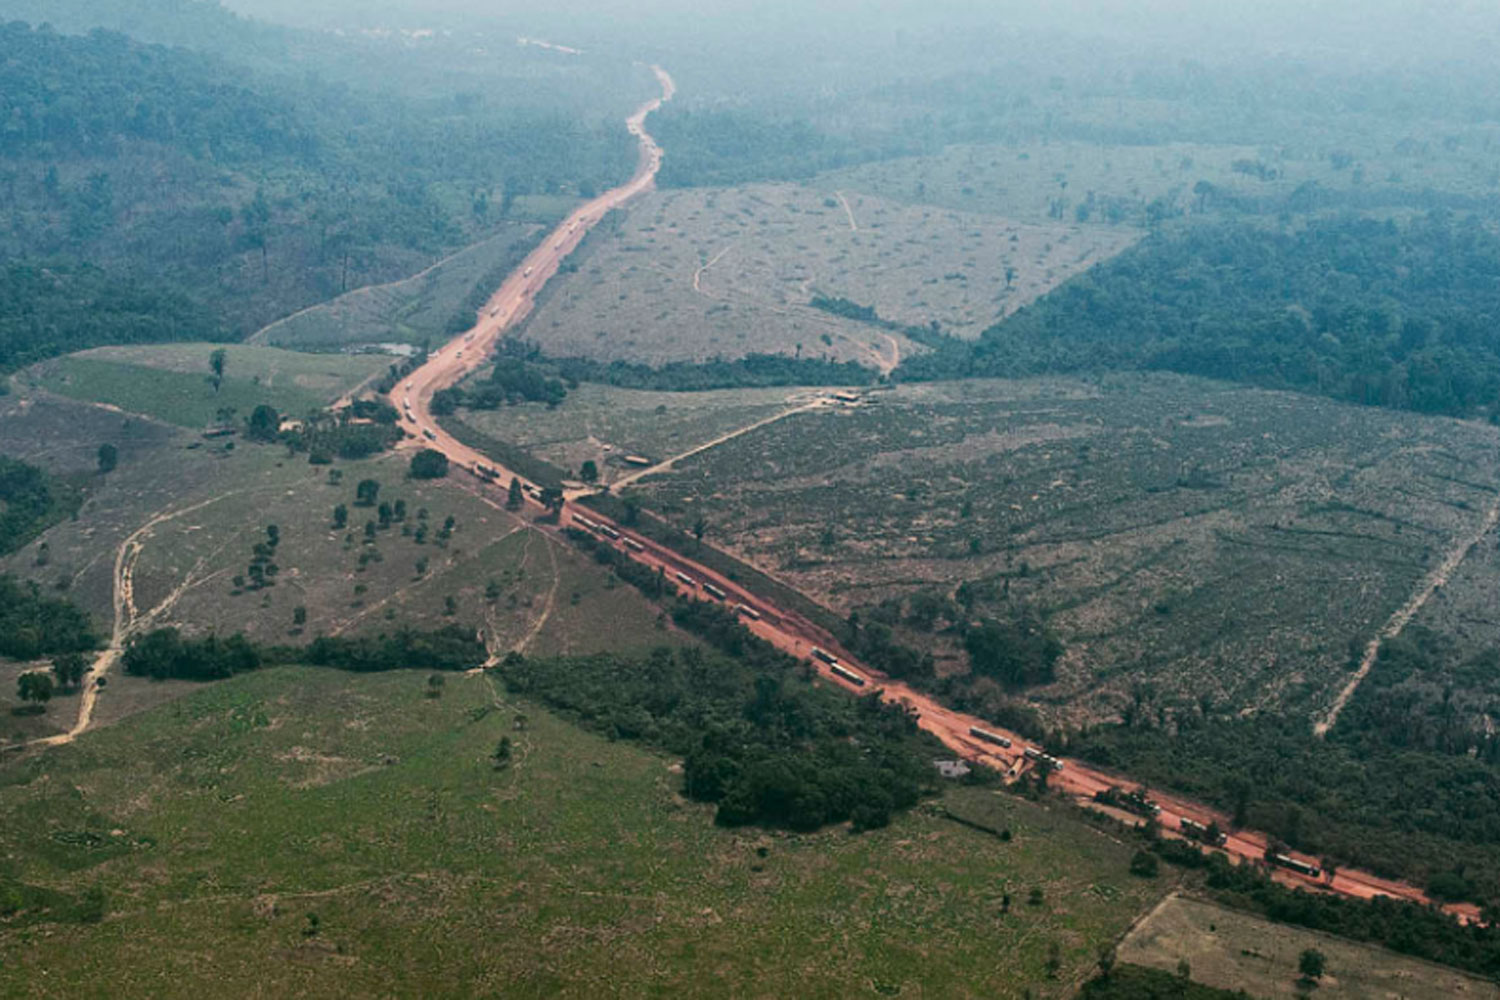 The BR-163 highway in Brazil, as seen from the air.